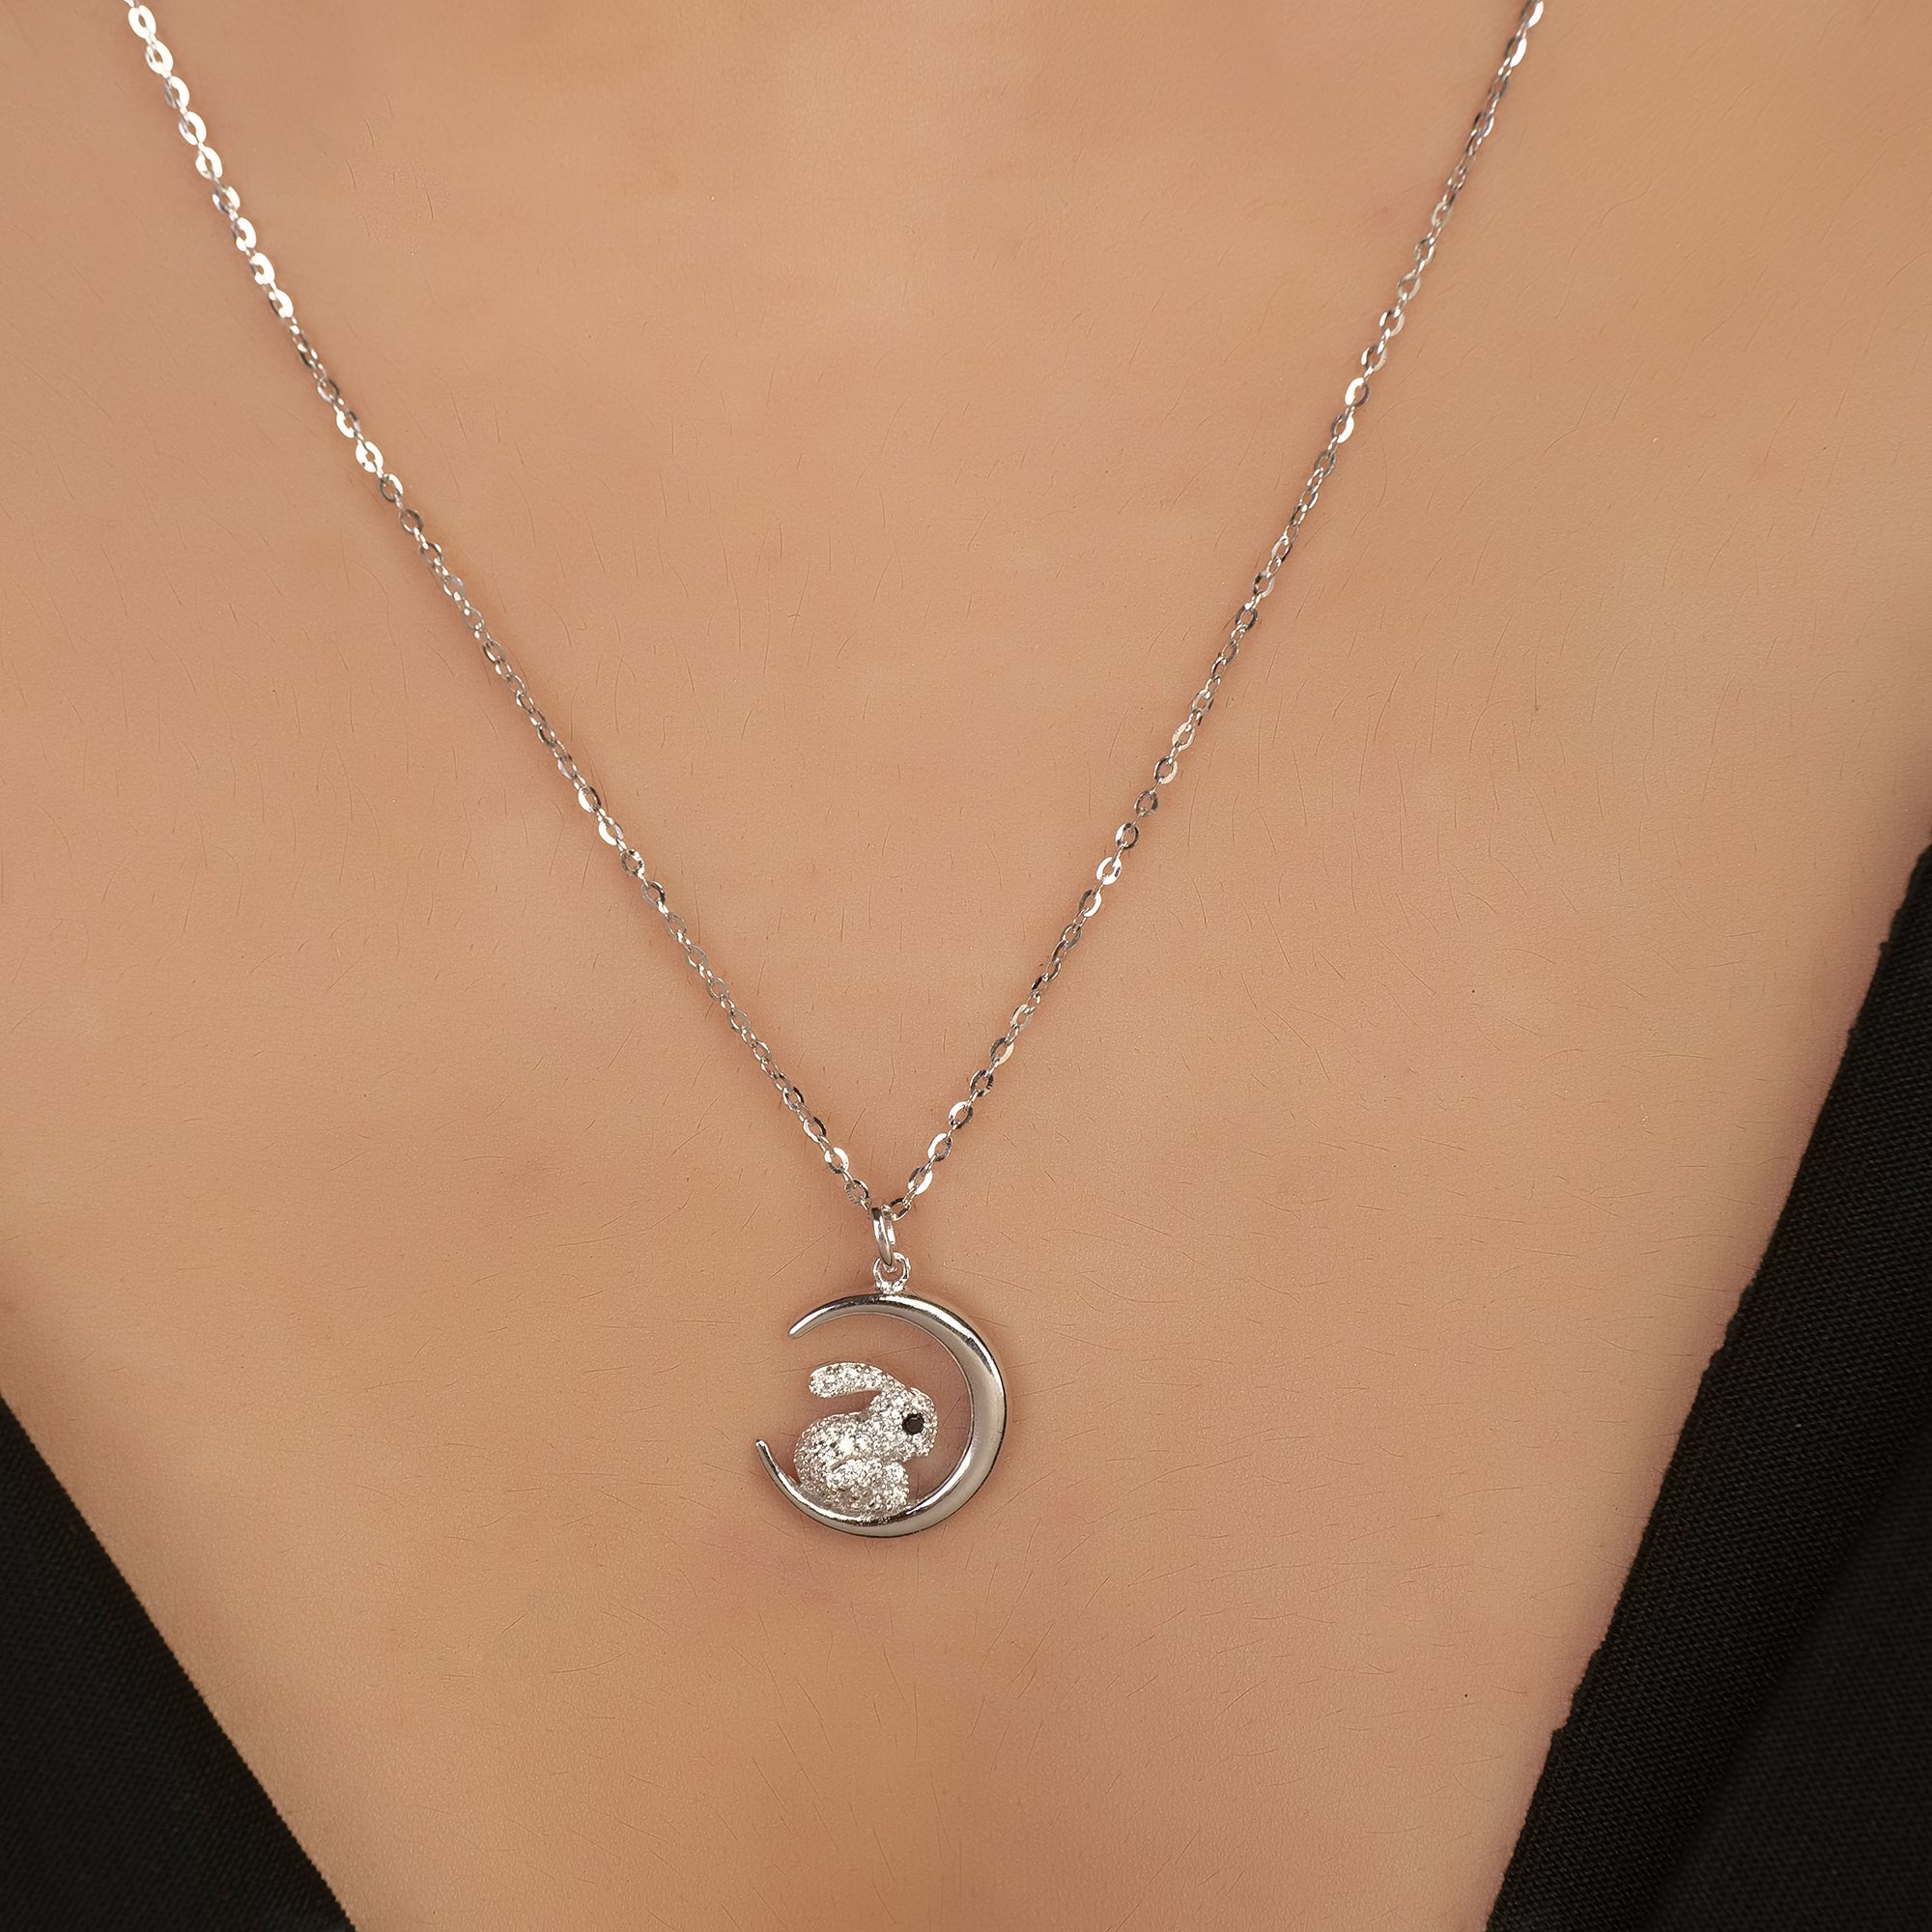 Silver half moon in rabbit Pendant with chain